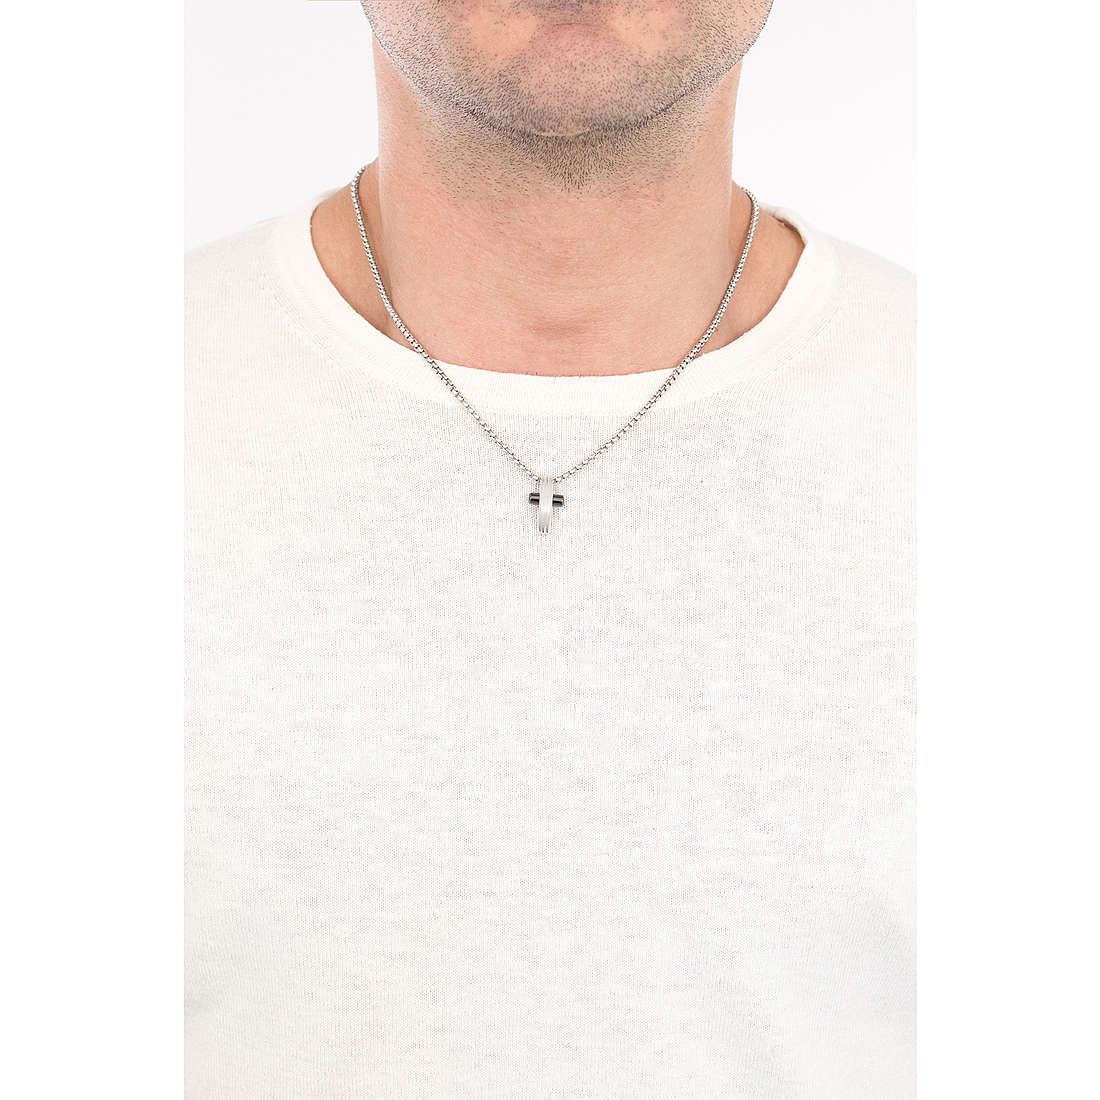 Brosway necklaces Crux man BRX06 wearing